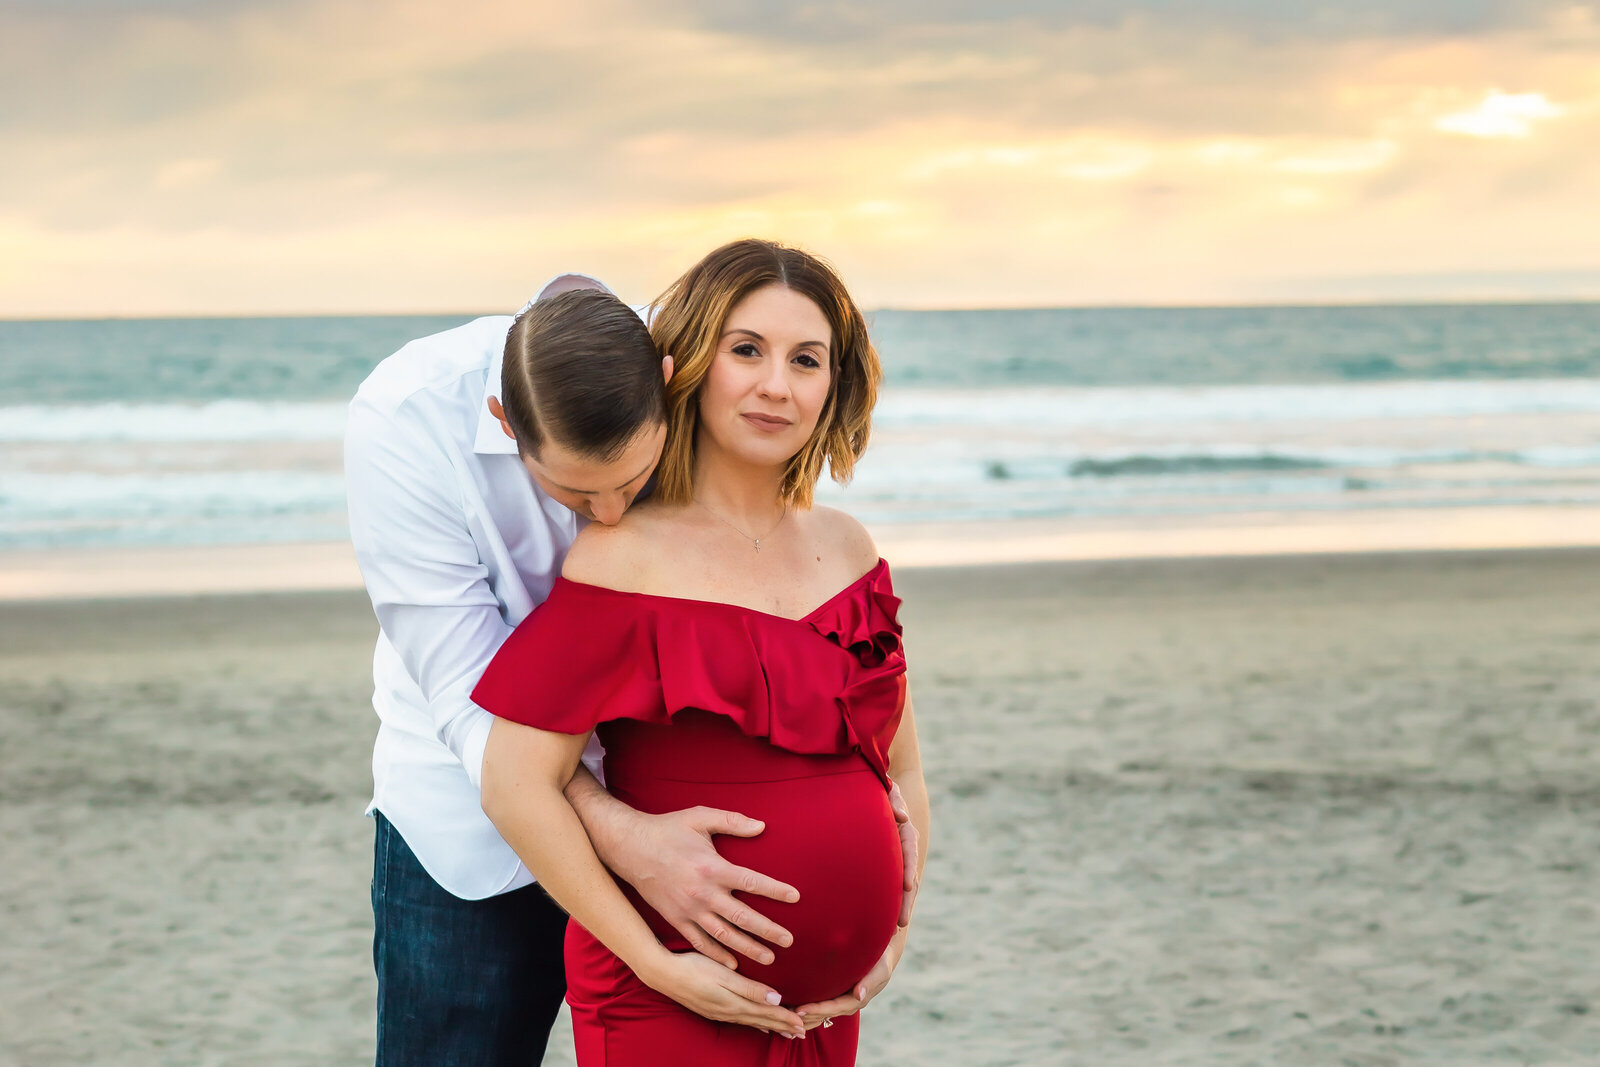 Maternity Photographer, a husband embraces his pregnant wife on the beach at sunset